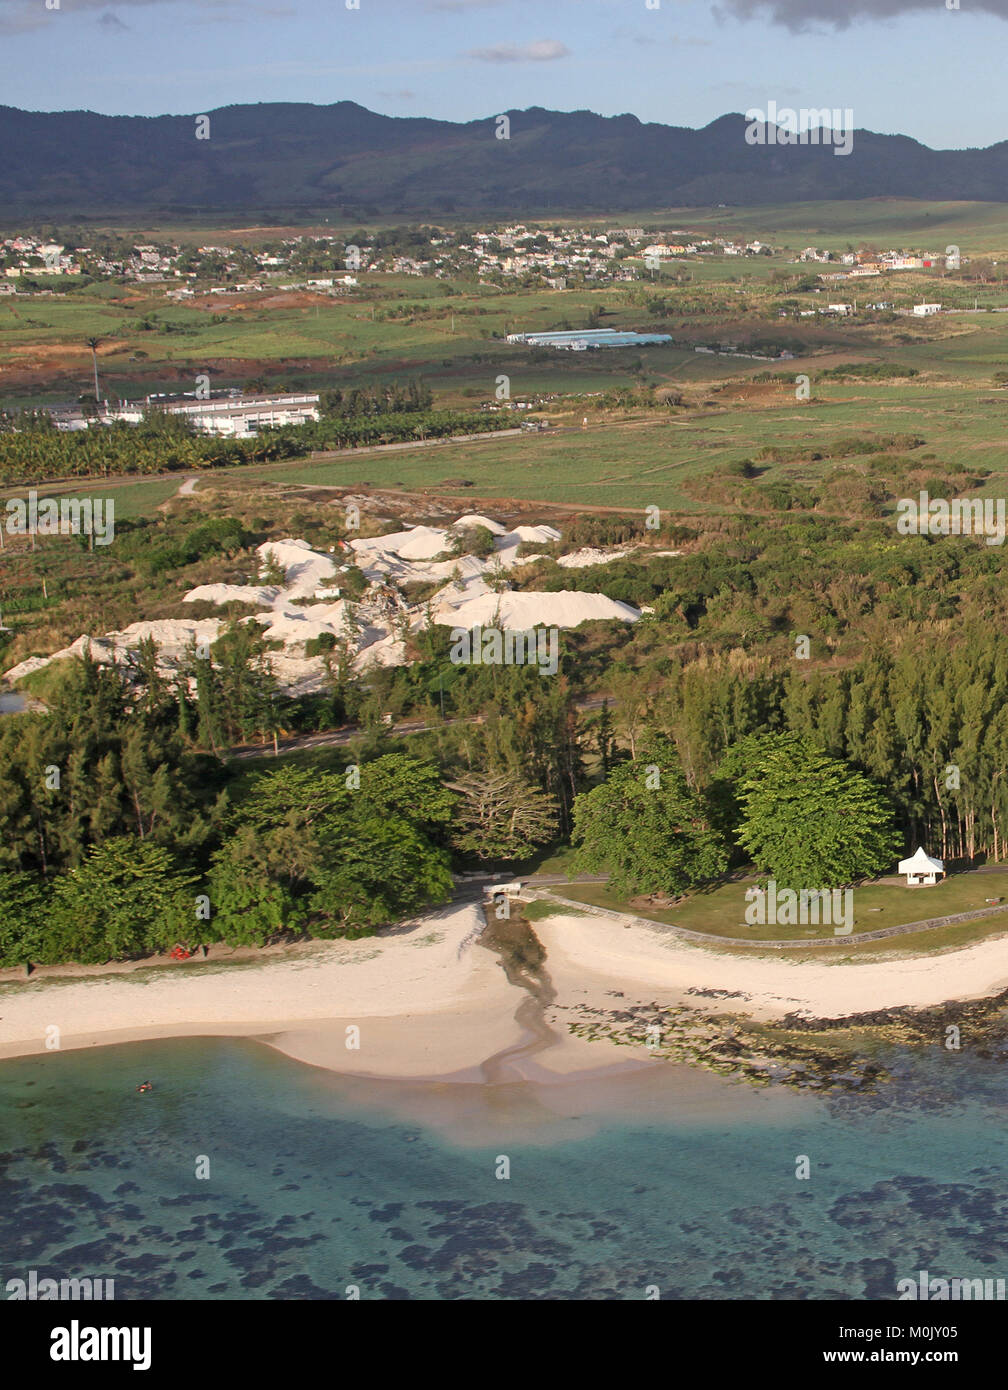 Water pipeline leaking into beach from forest, view from helicopter, near Le Morne Brabant, Riviere Noire District, The Republic of Mauritius. Stock Photo